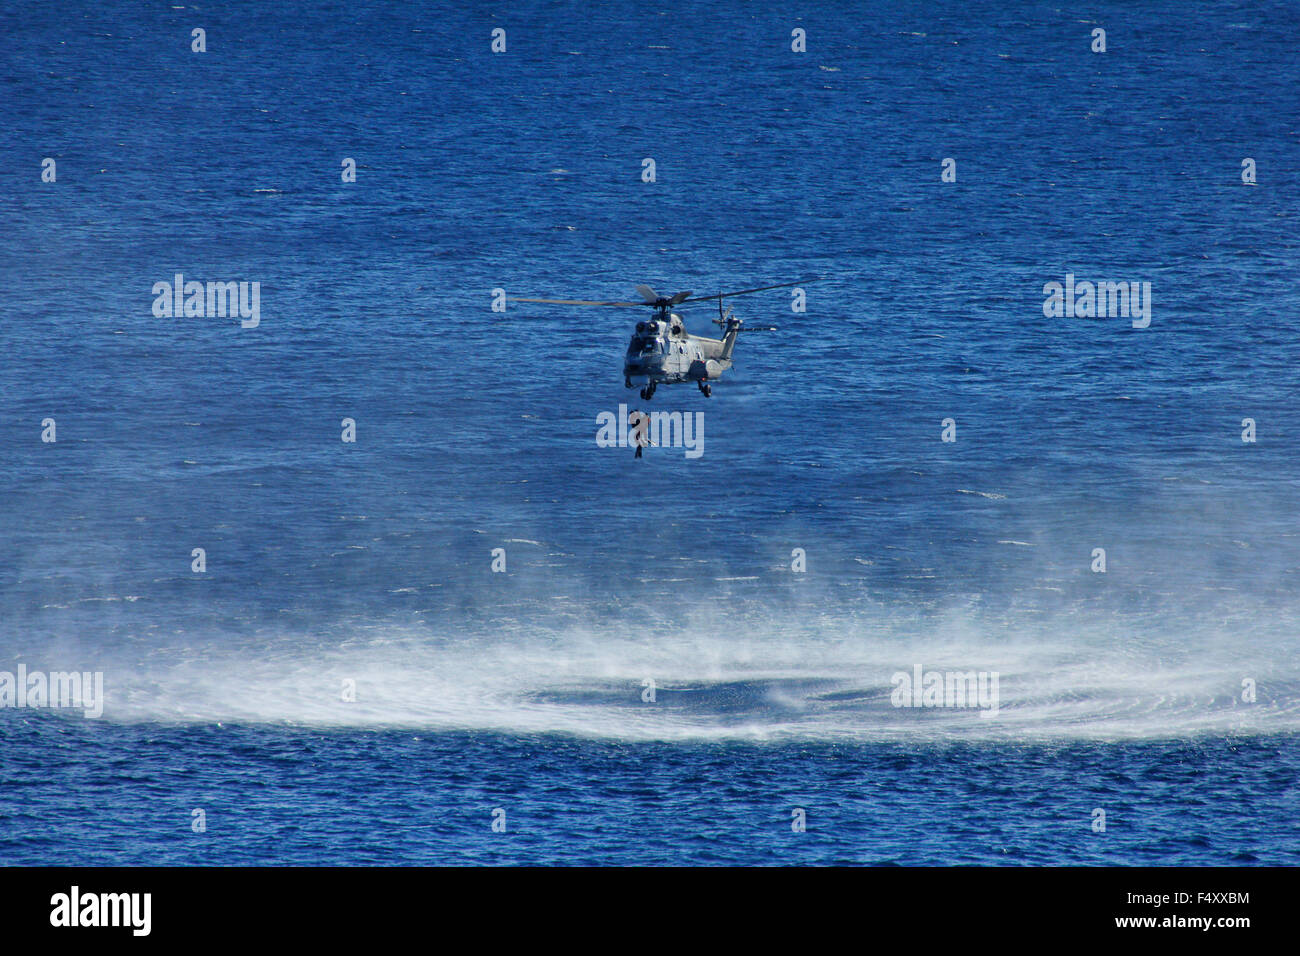 The SAR helicopter, hoisting up the drill members, ending the drill. Northeastern Aegean sea, Lemnos island, Greece Stock Photo